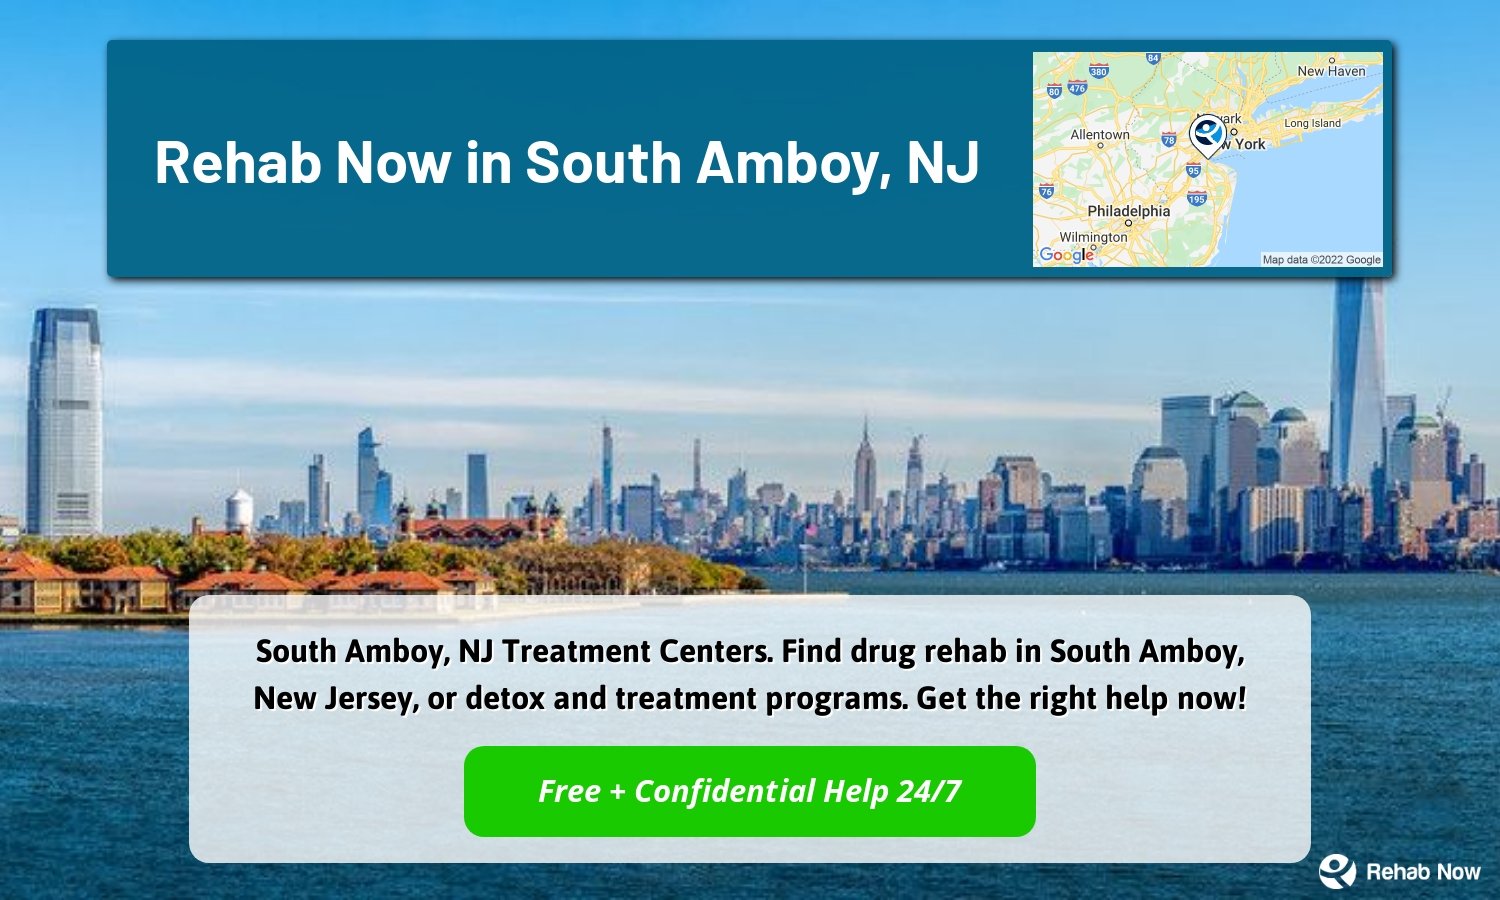 South Amboy, NJ Treatment Centers. Find drug rehab in South Amboy, New Jersey, or detox and treatment programs. Get the right help now!